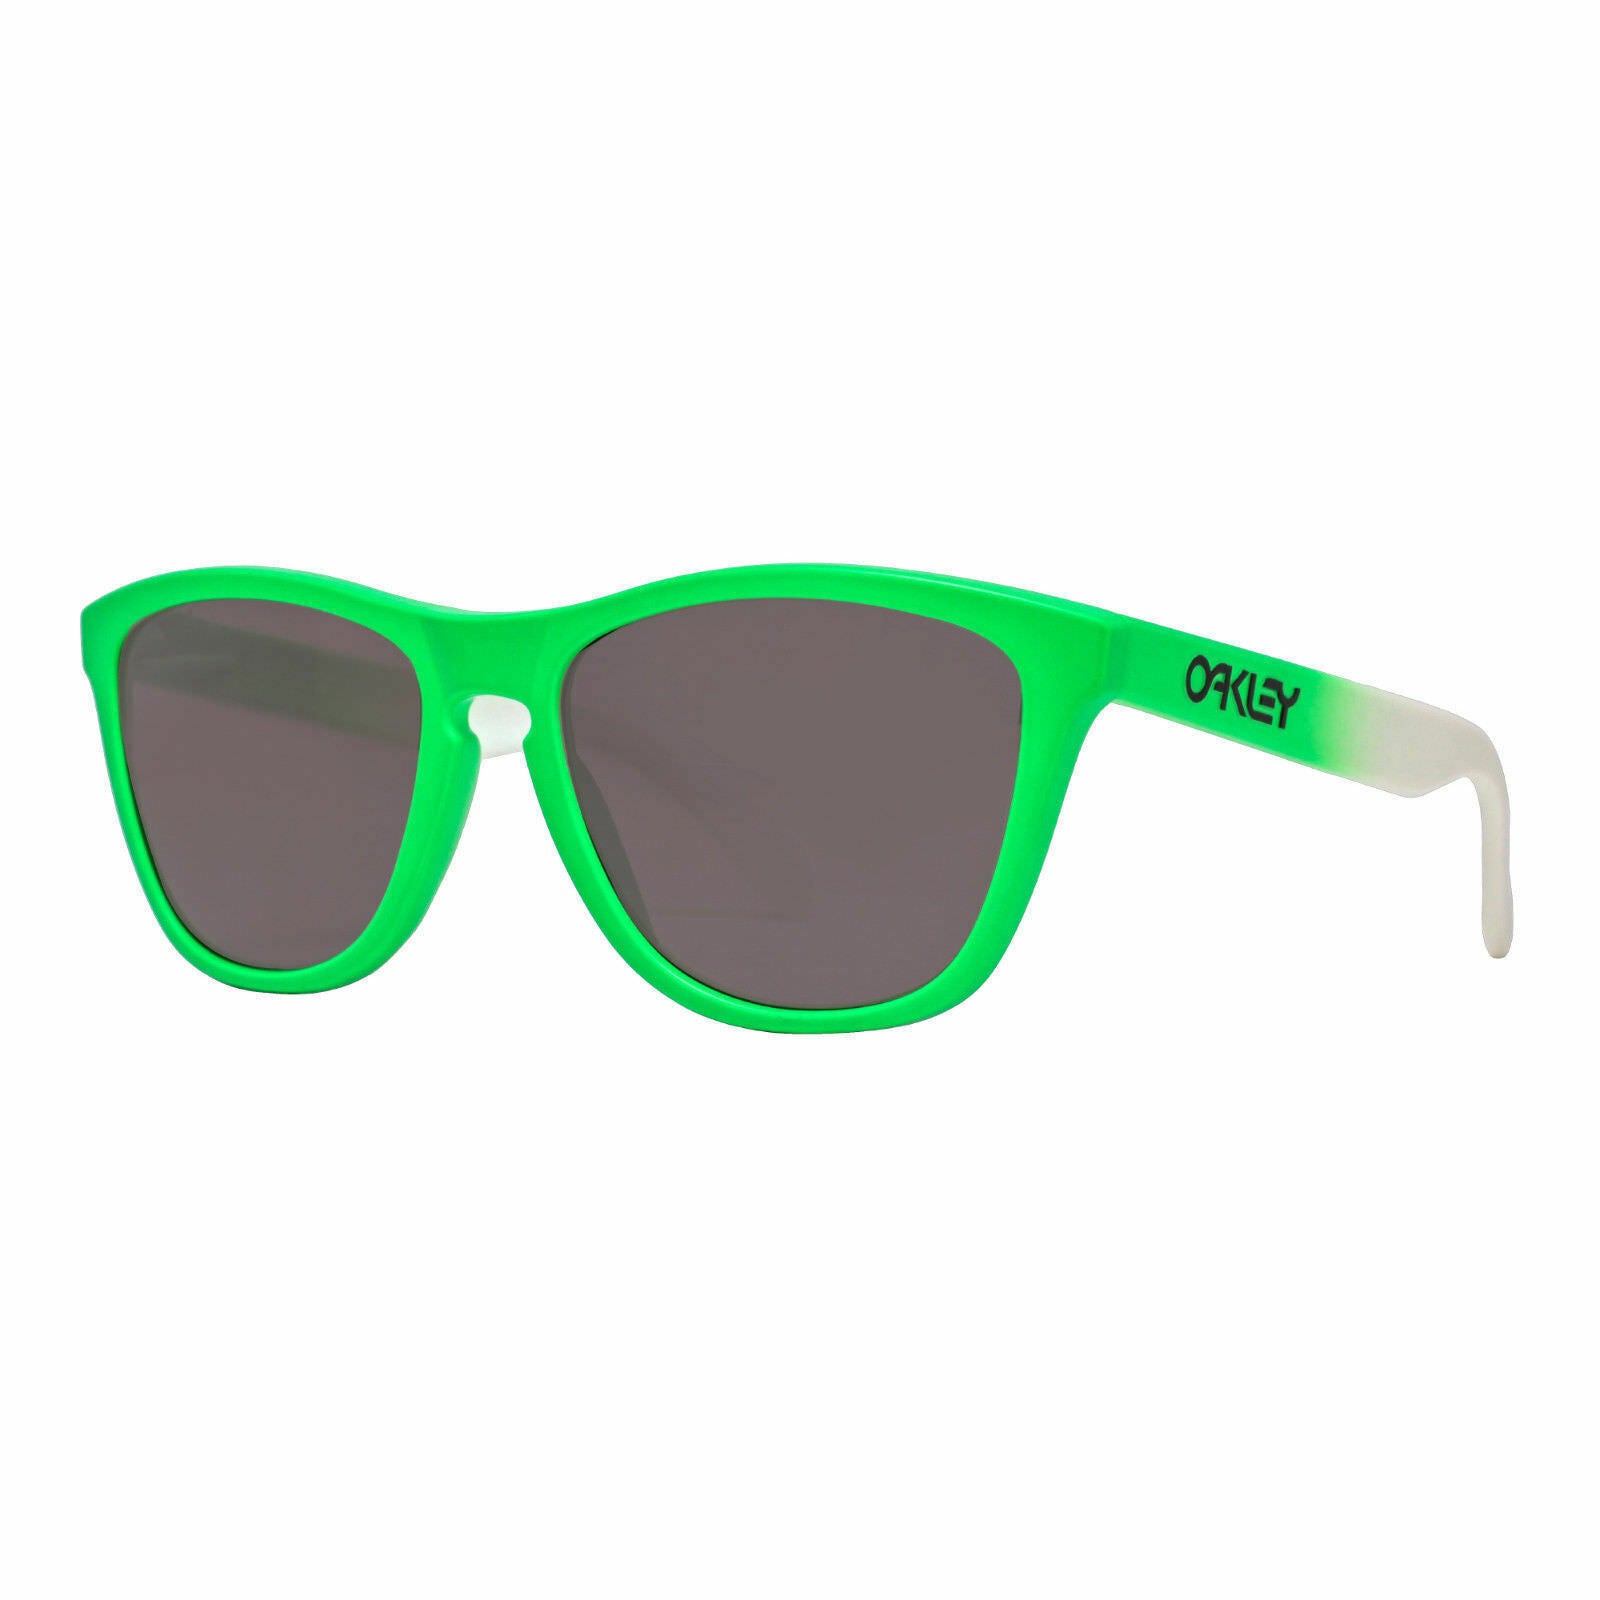 Oakley Frogskins Prizm Polarized Green Fade OO9013-99 Sunglasses - Ships Next Day!